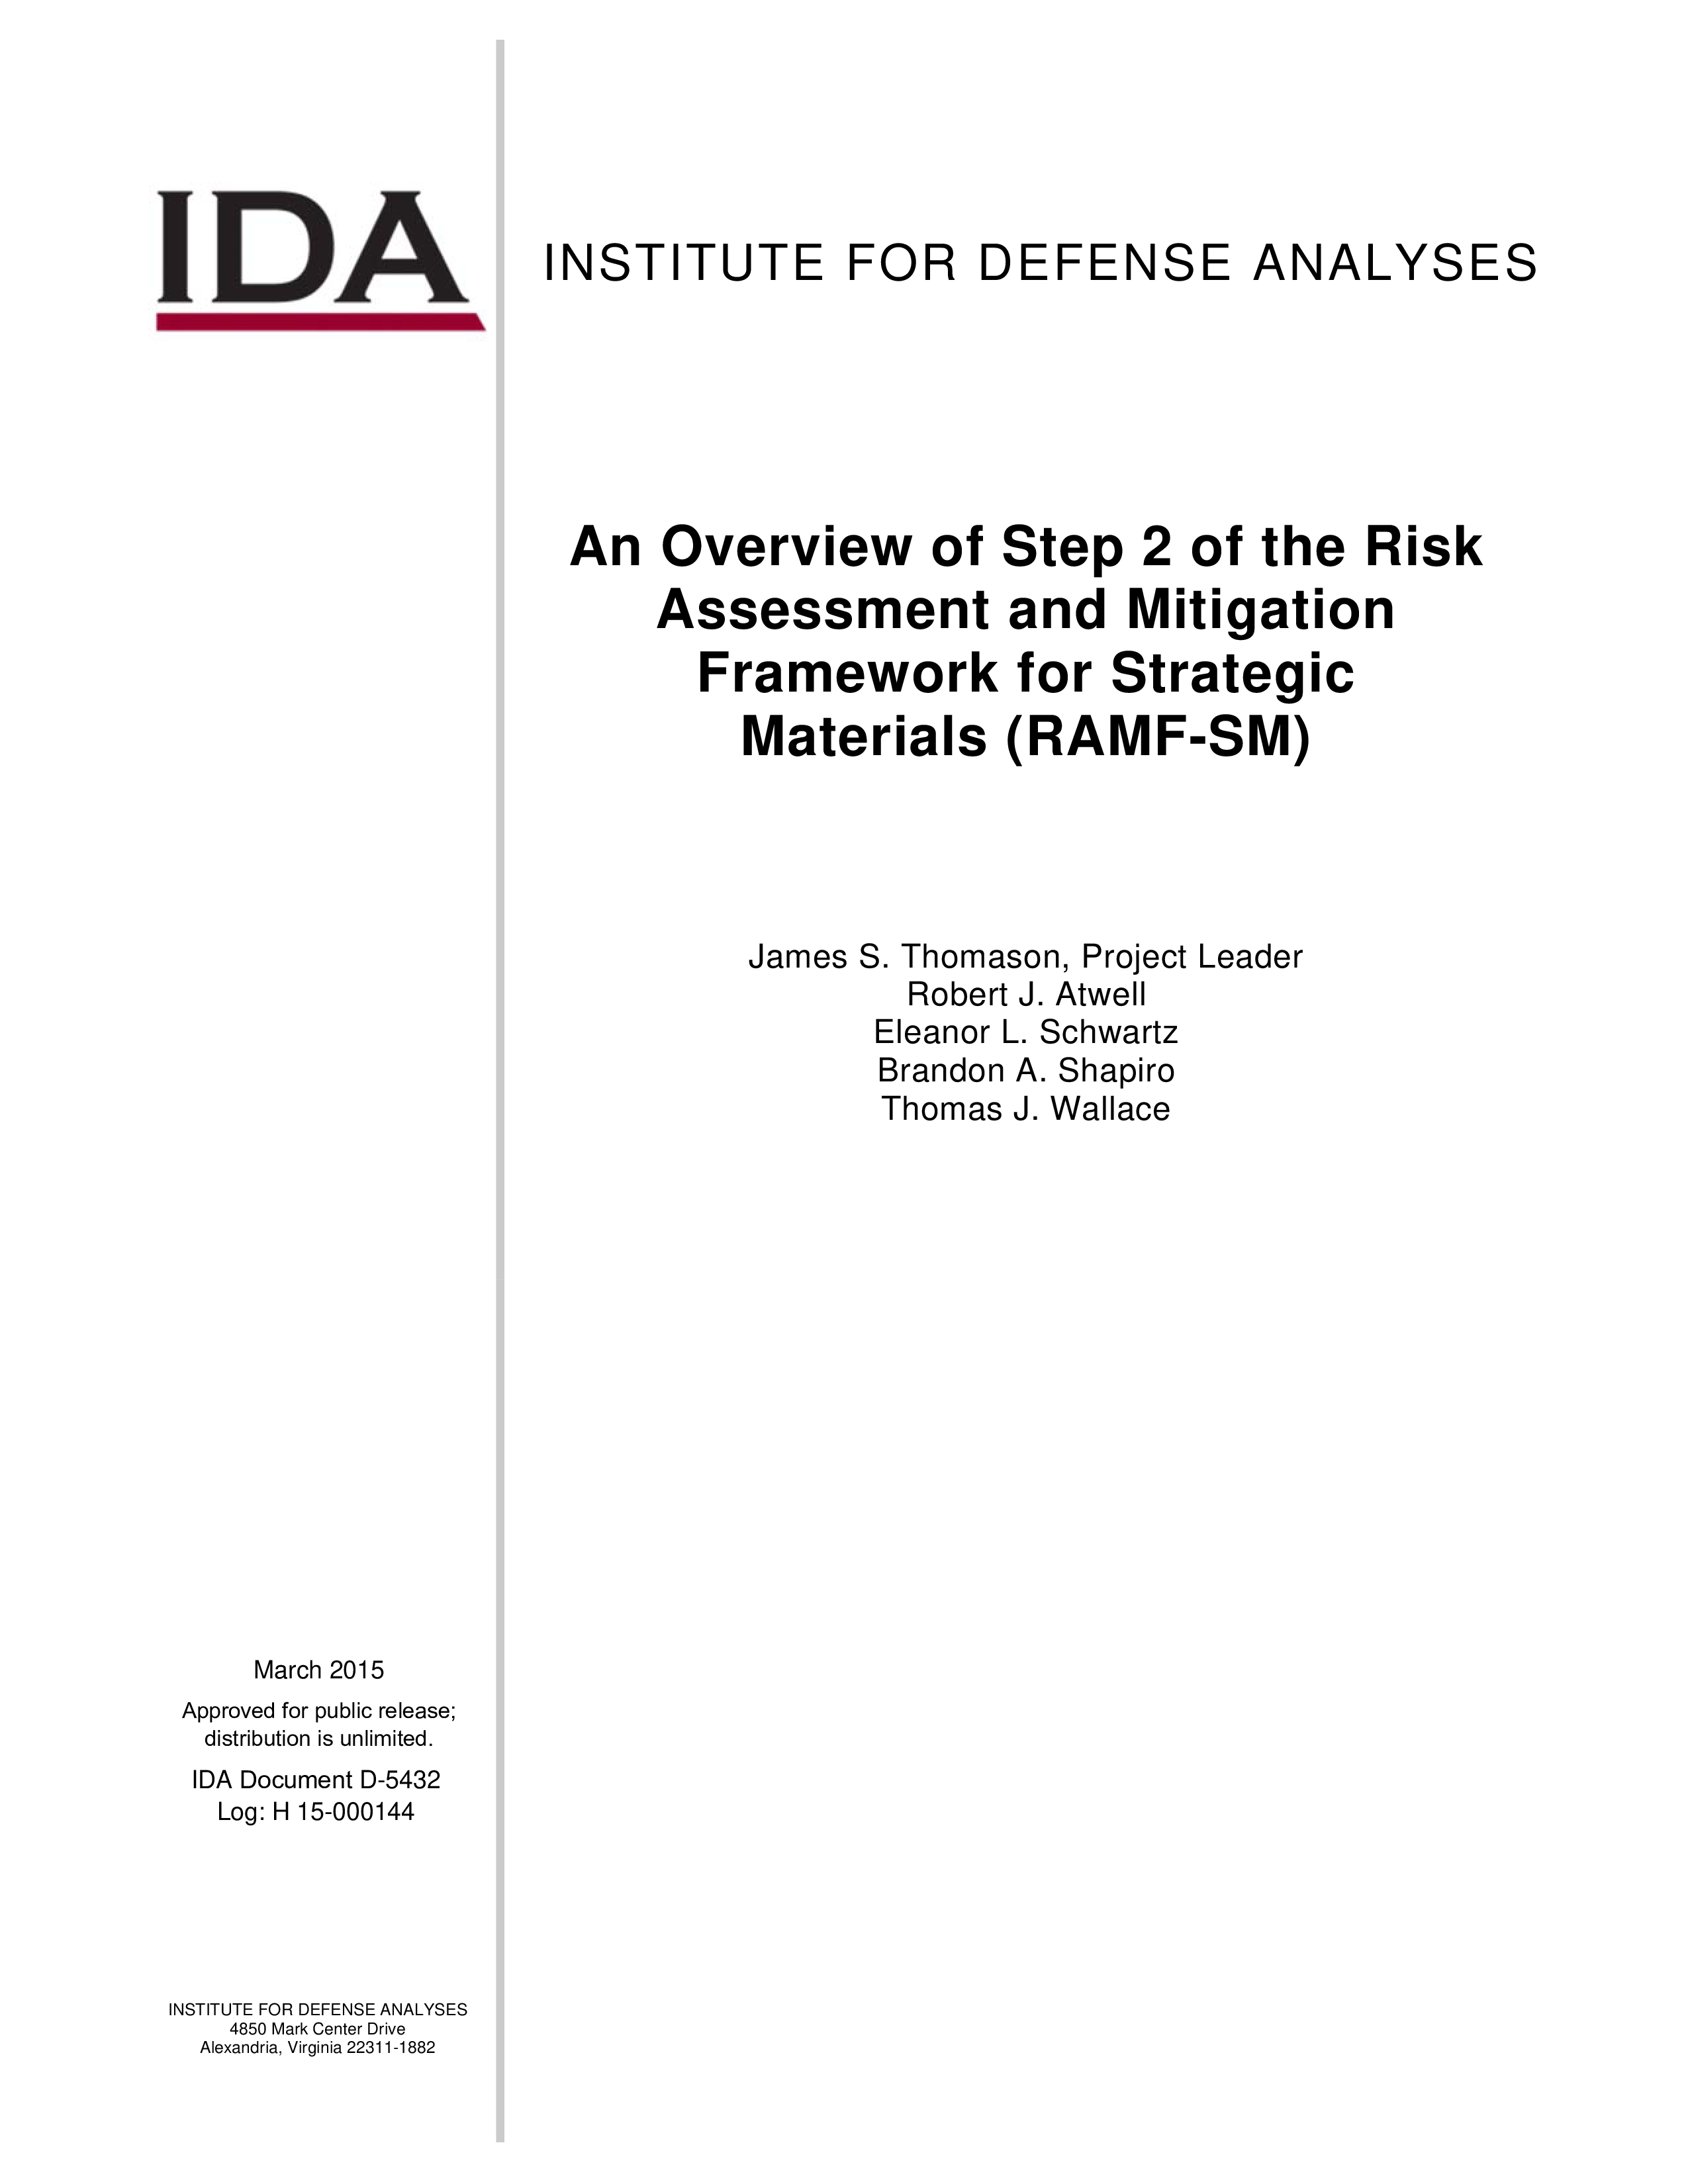 An Overview of Step 2 of the Risk Assessment and Mitigation Framework for Strategic Materials (RAMF-SM)